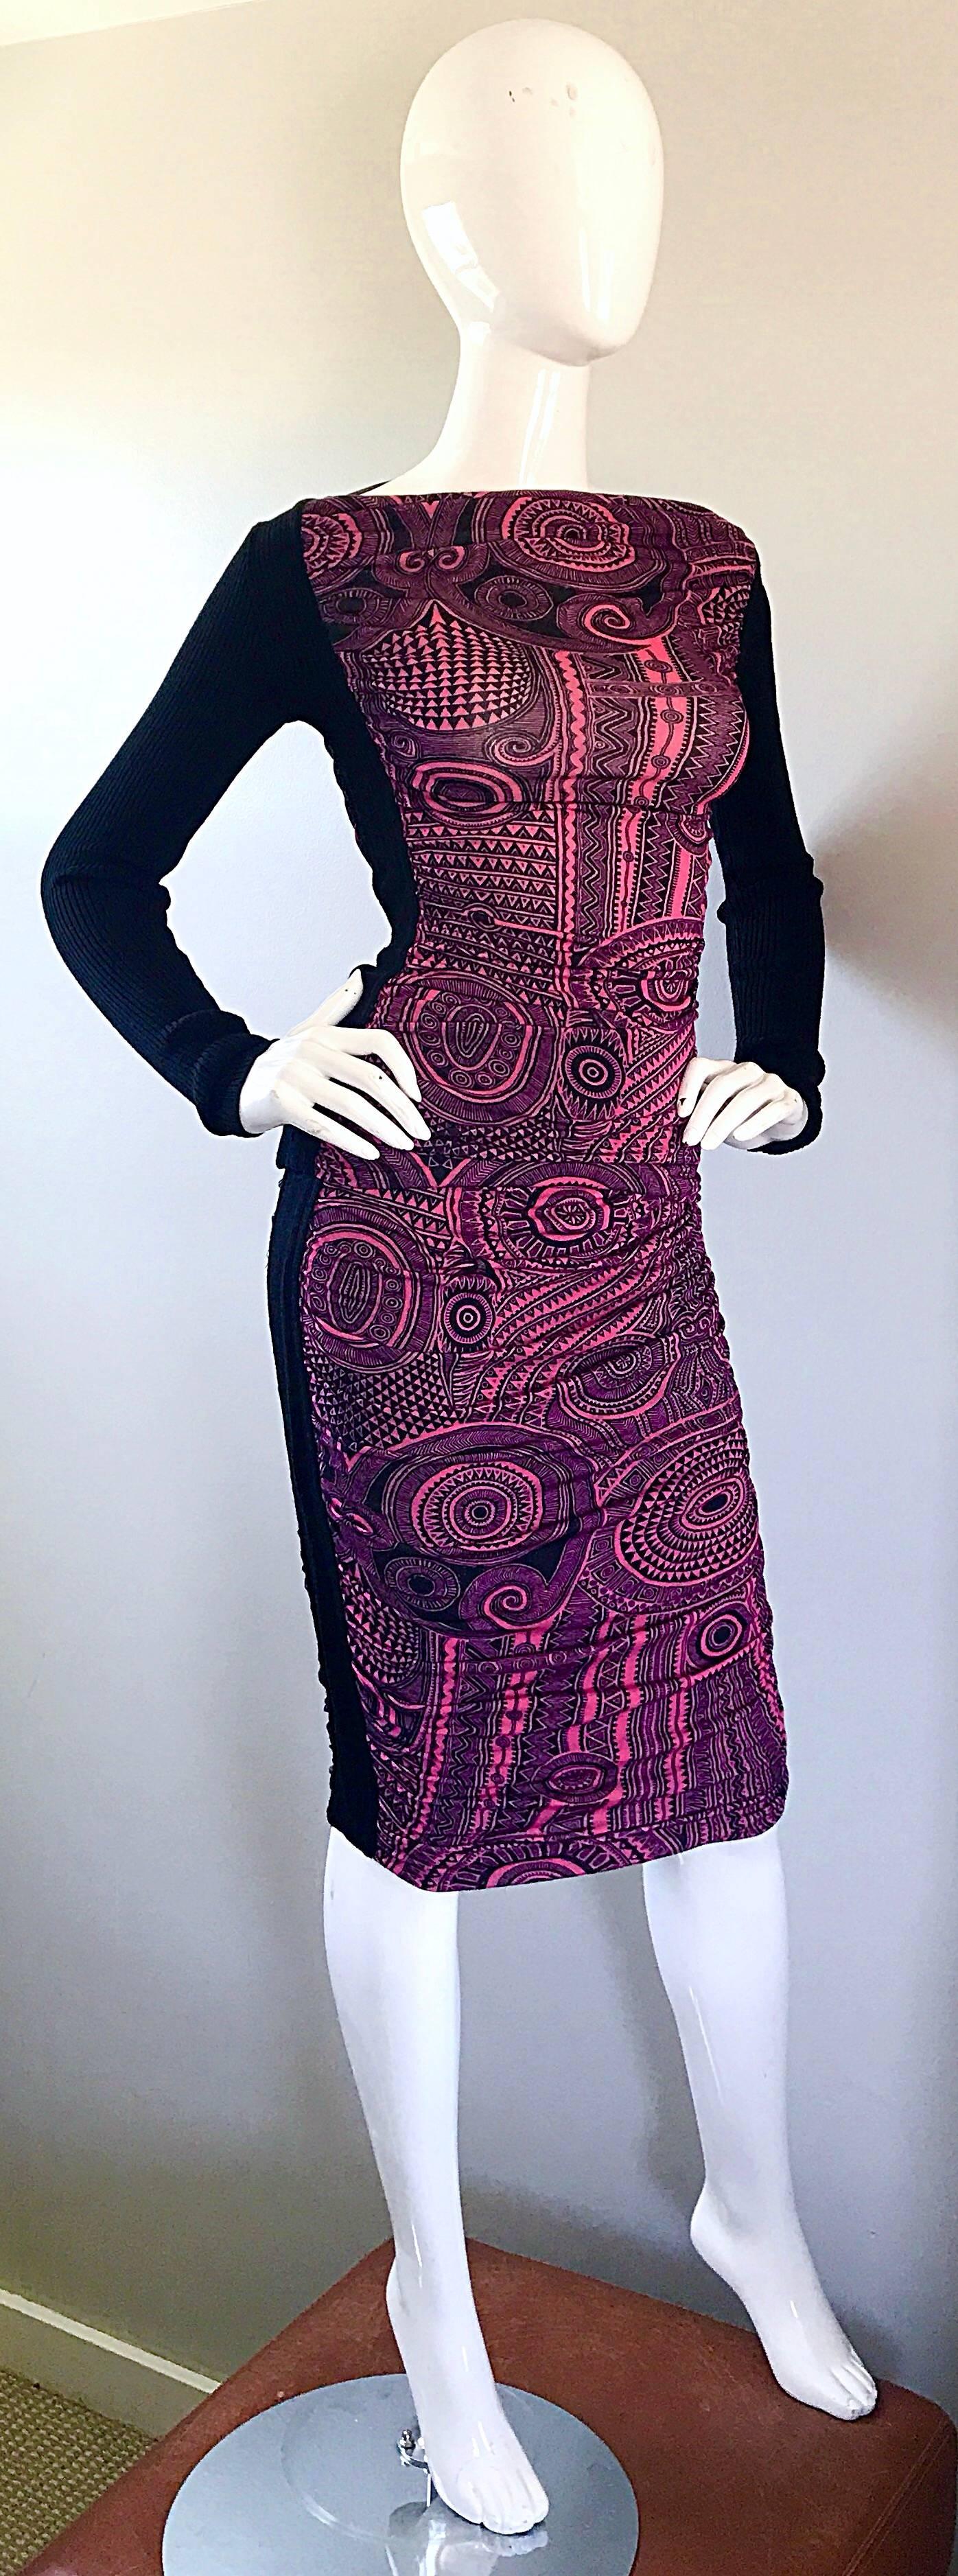 Jean Paul Gaultier Vintage 1990s Pink + Black Aztec Top & Skirt Dress Ensemble In Excellent Condition For Sale In San Diego, CA